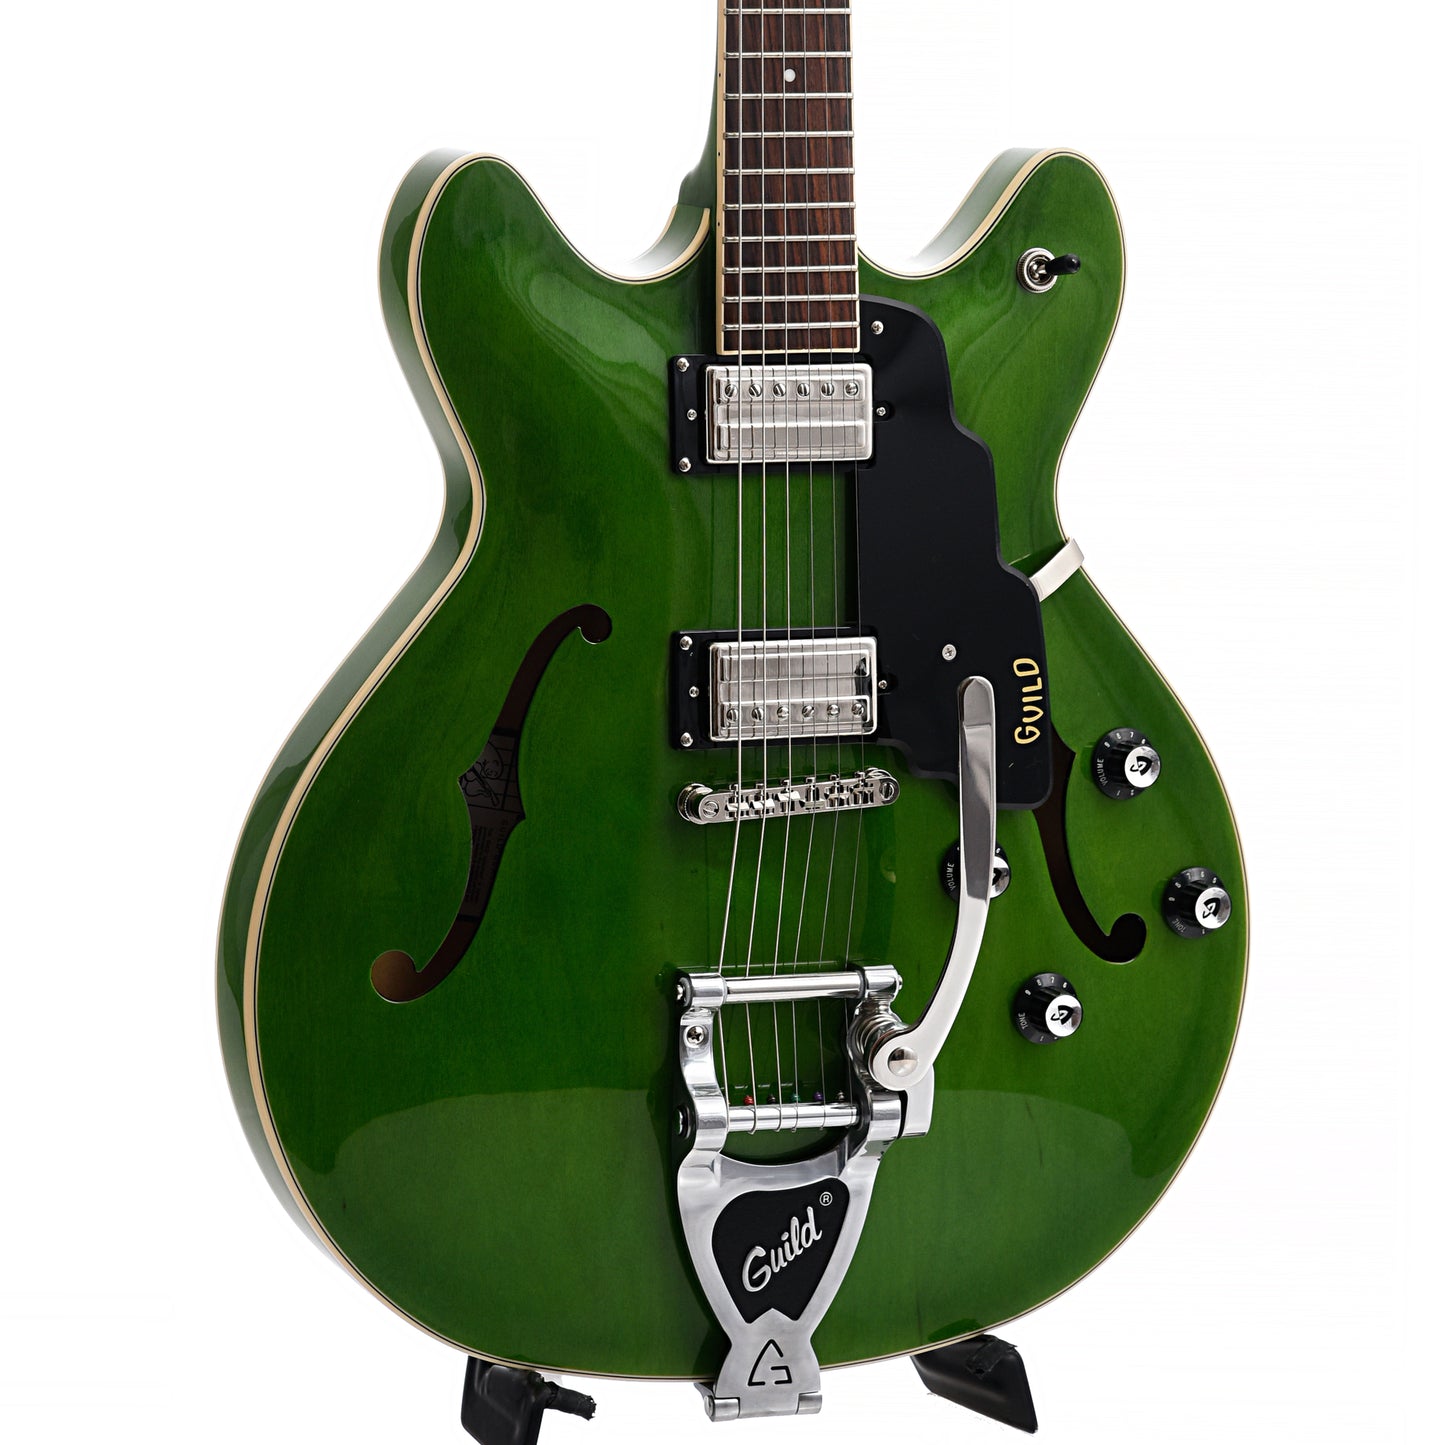 Image 1 of Guild Starfire I Double Cutaway Semi-Hollow Body Guitar with Vibrato, Emerald Green- SKU# GSF1DCV-GRN : Product Type Hollow Body Electric Guitars : Elderly Instruments